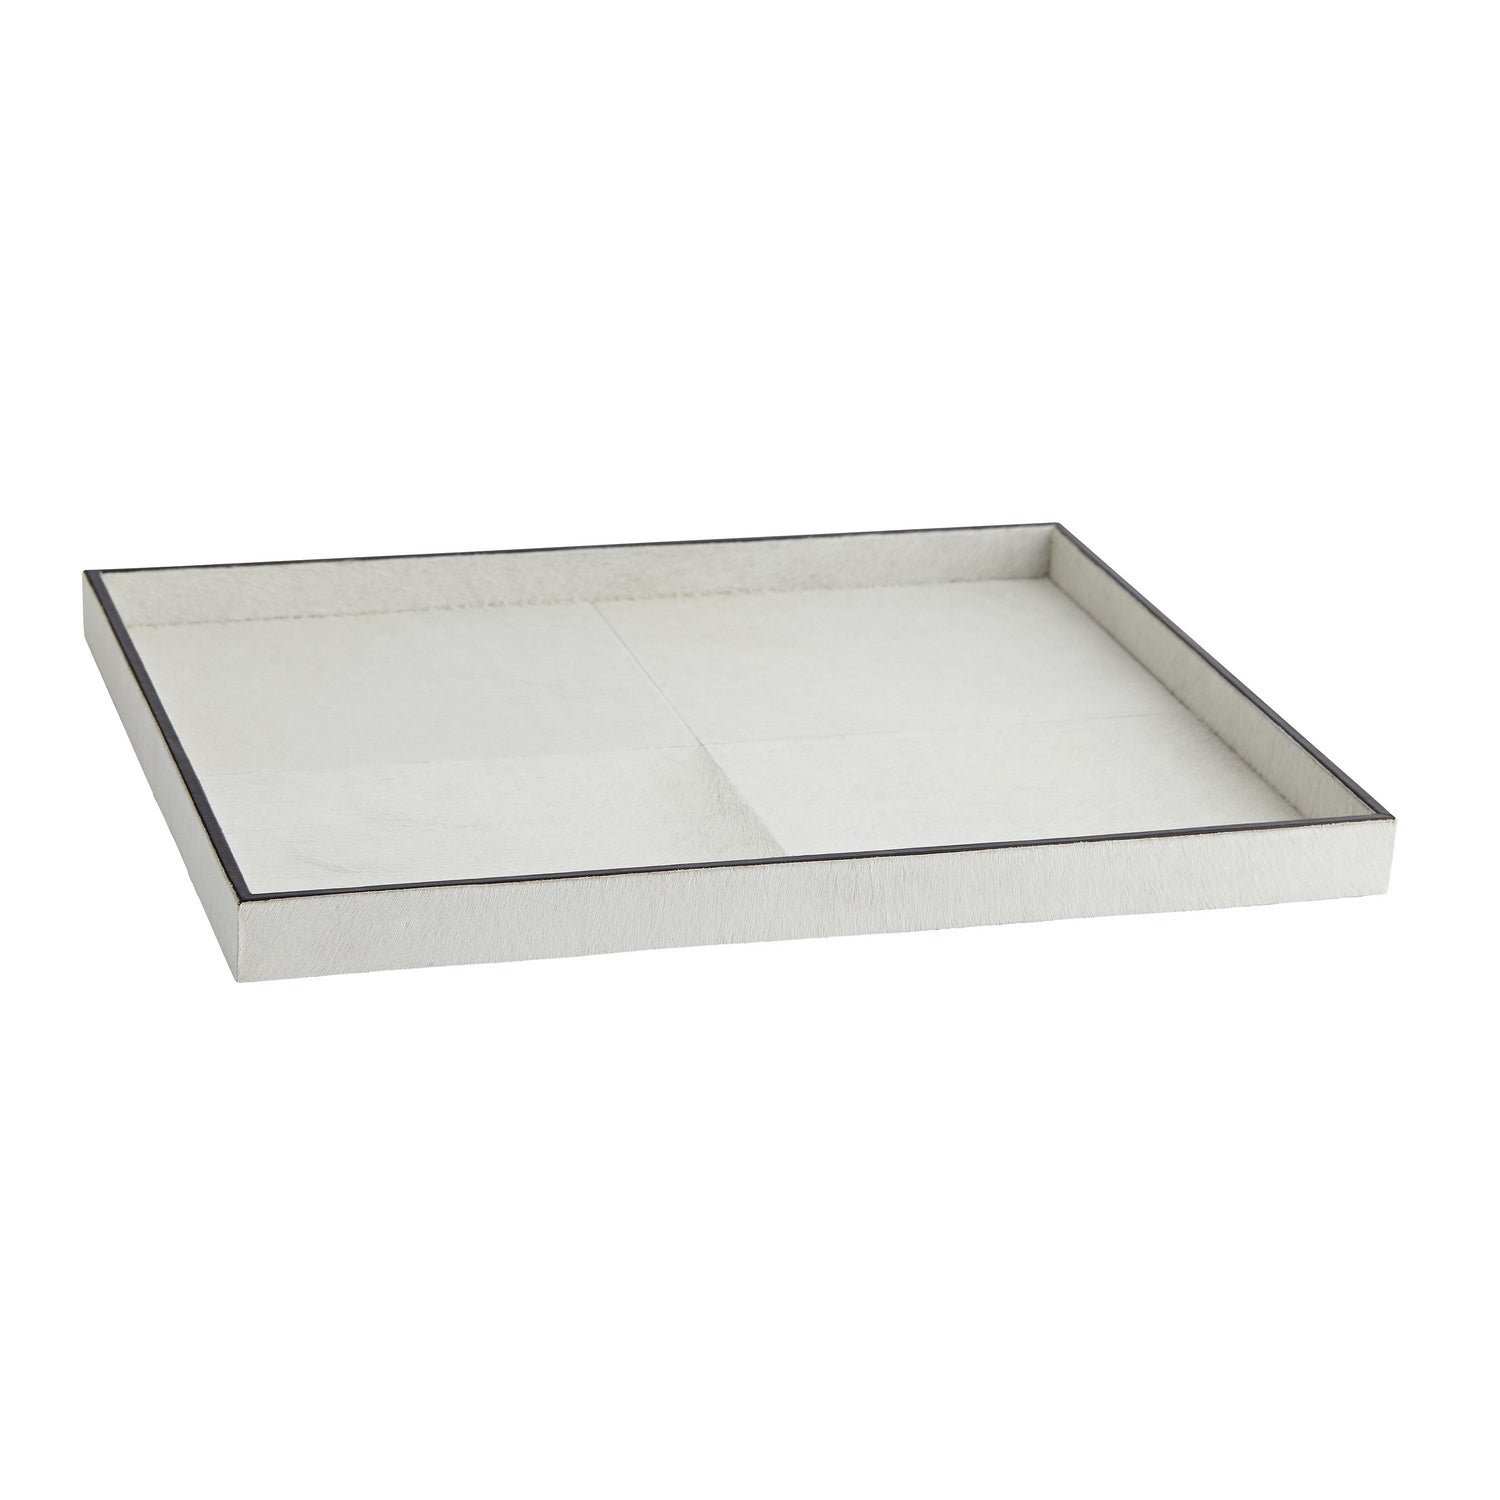 Tray from the Caspian collection in White finish